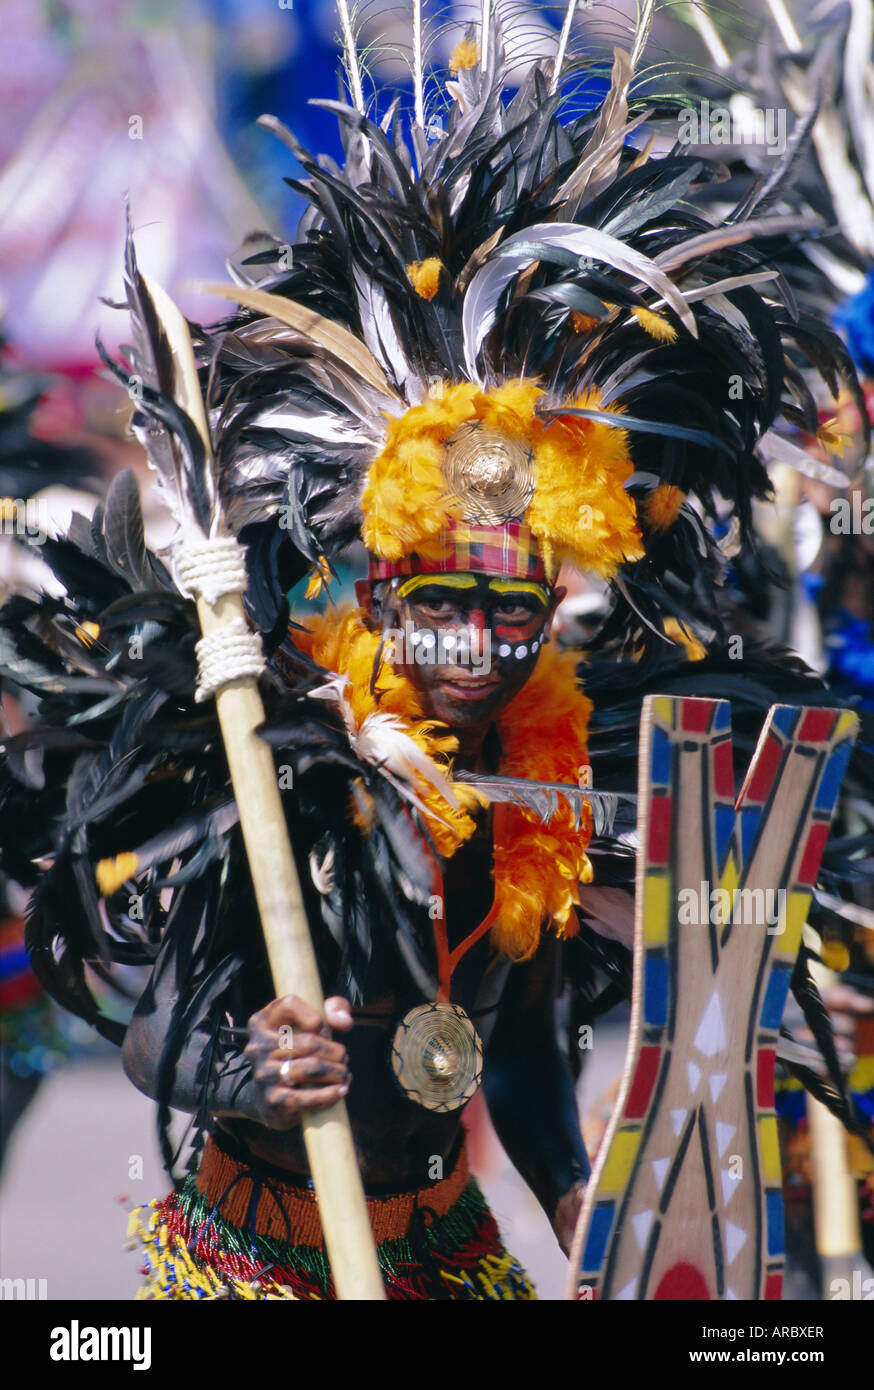 Portrait of a boy in costume and facial paint, Mardi Gras, Dinagyang, Iloilo City, island of Panay, Philippines, Southeast Asia Stock Photo